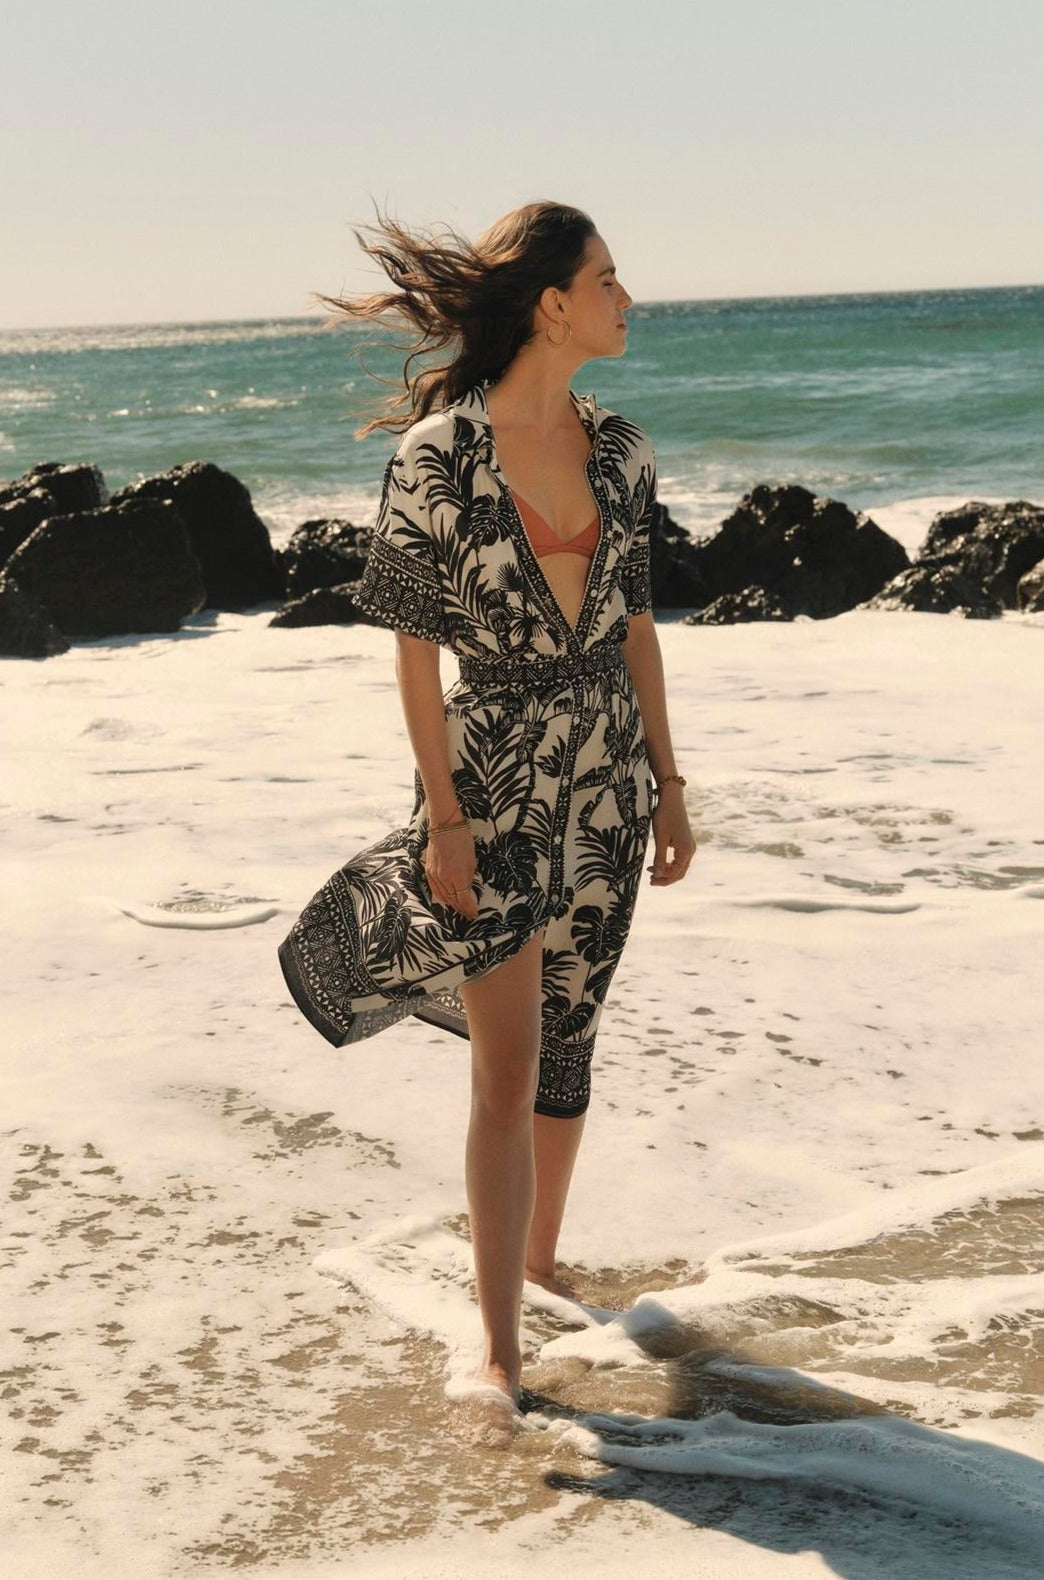 Woman in a tropical Freya dress by Velvet by Graham & Spencer standing on a sandy beach with waves touching her feet, looking out to sea, hair blowing in the wind.-36910269956289